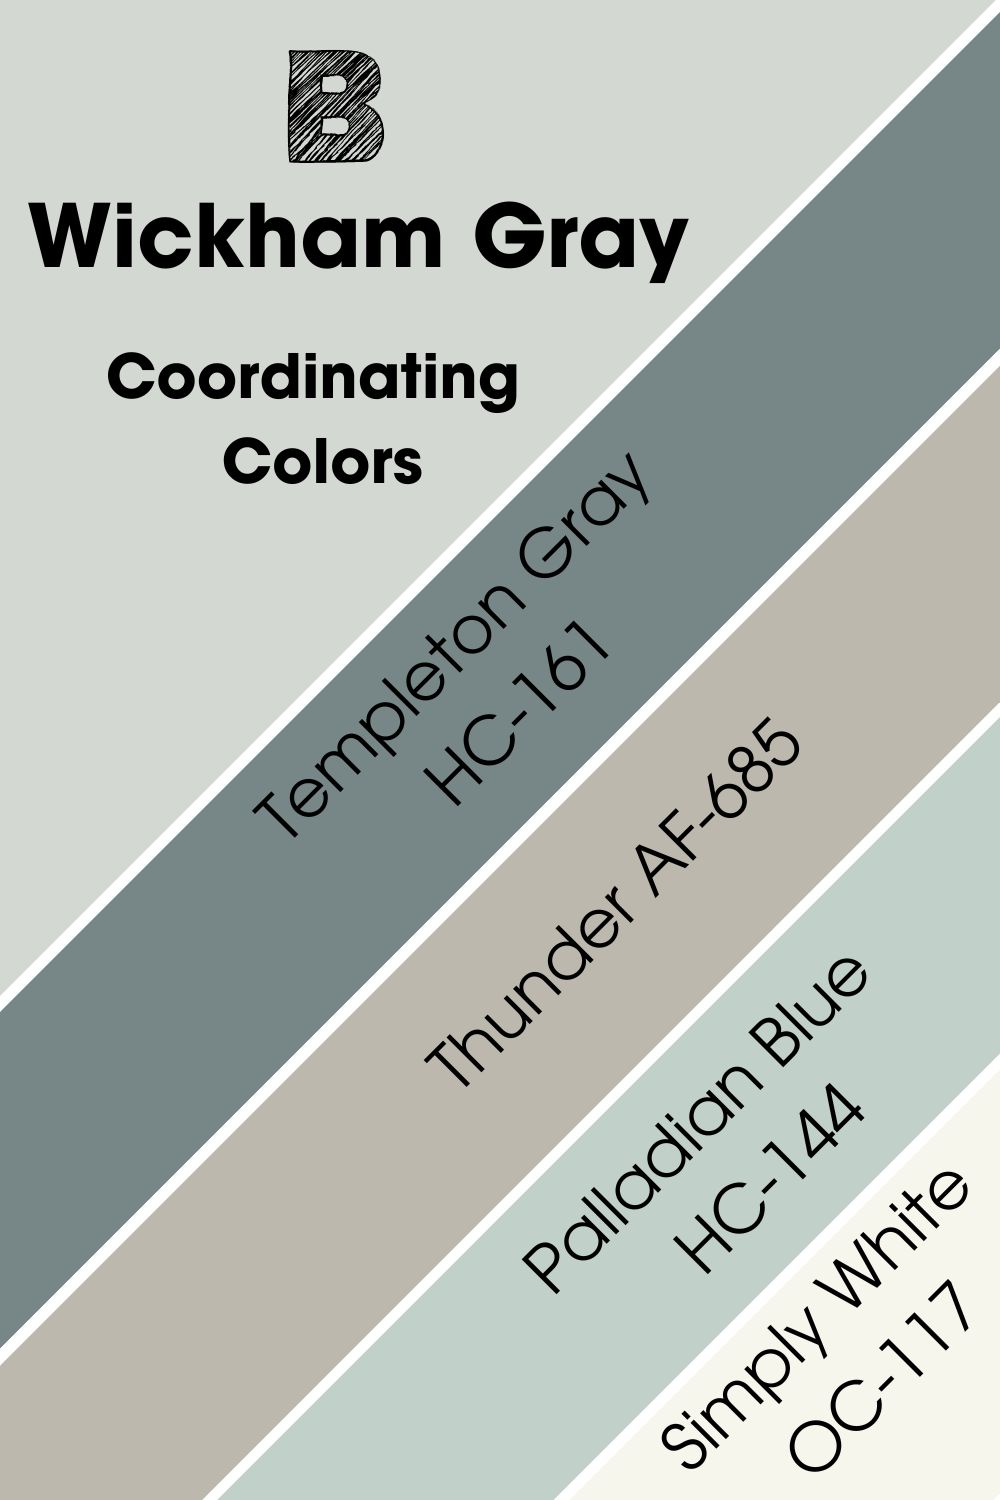 Coordinating Colors for Wickham Gray